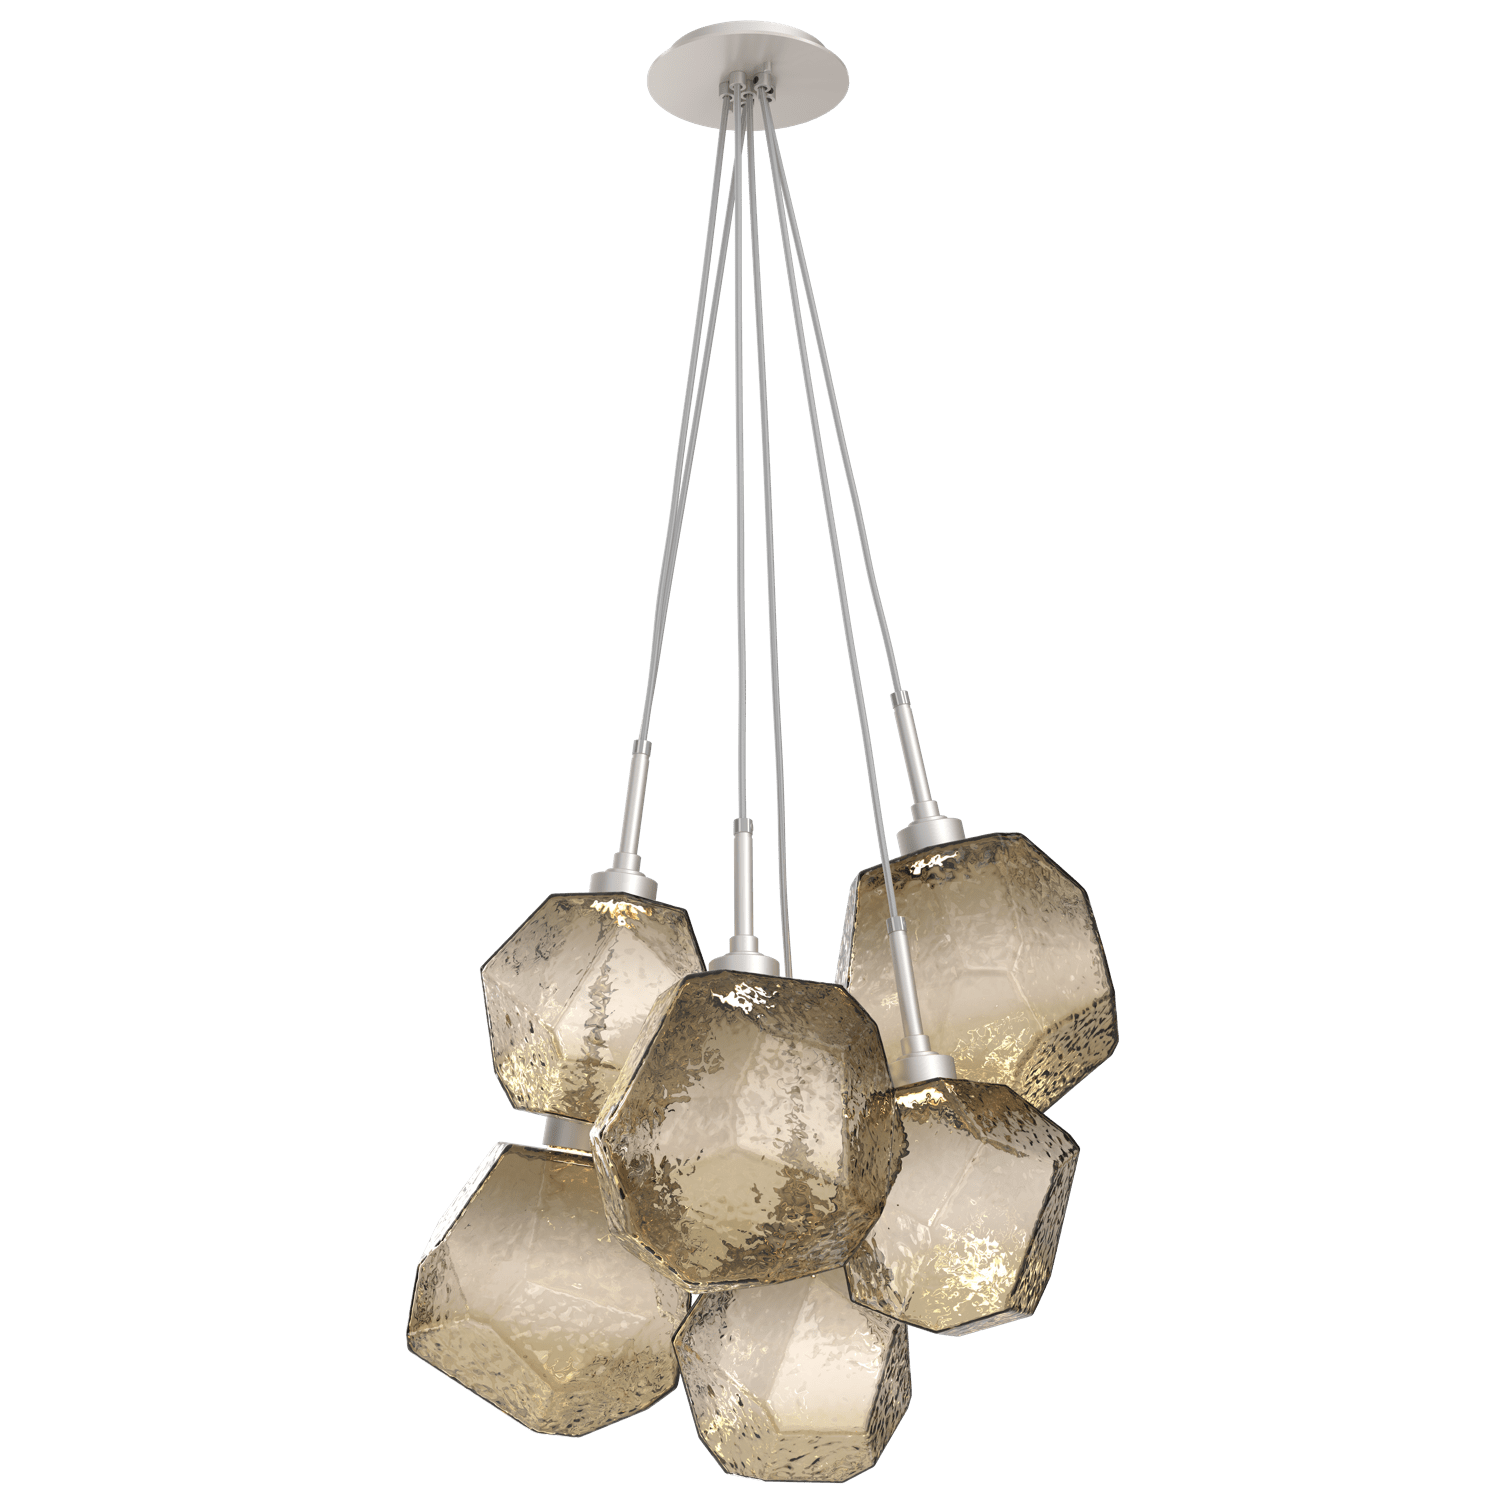 CHB0039-0F-BS-B-Hammerton-Studio-Gem-6-light-cluster-pendant-light-with-metallic-beige-silver-finish-and-bronze-blown-glass-shades-and-LED-lamping